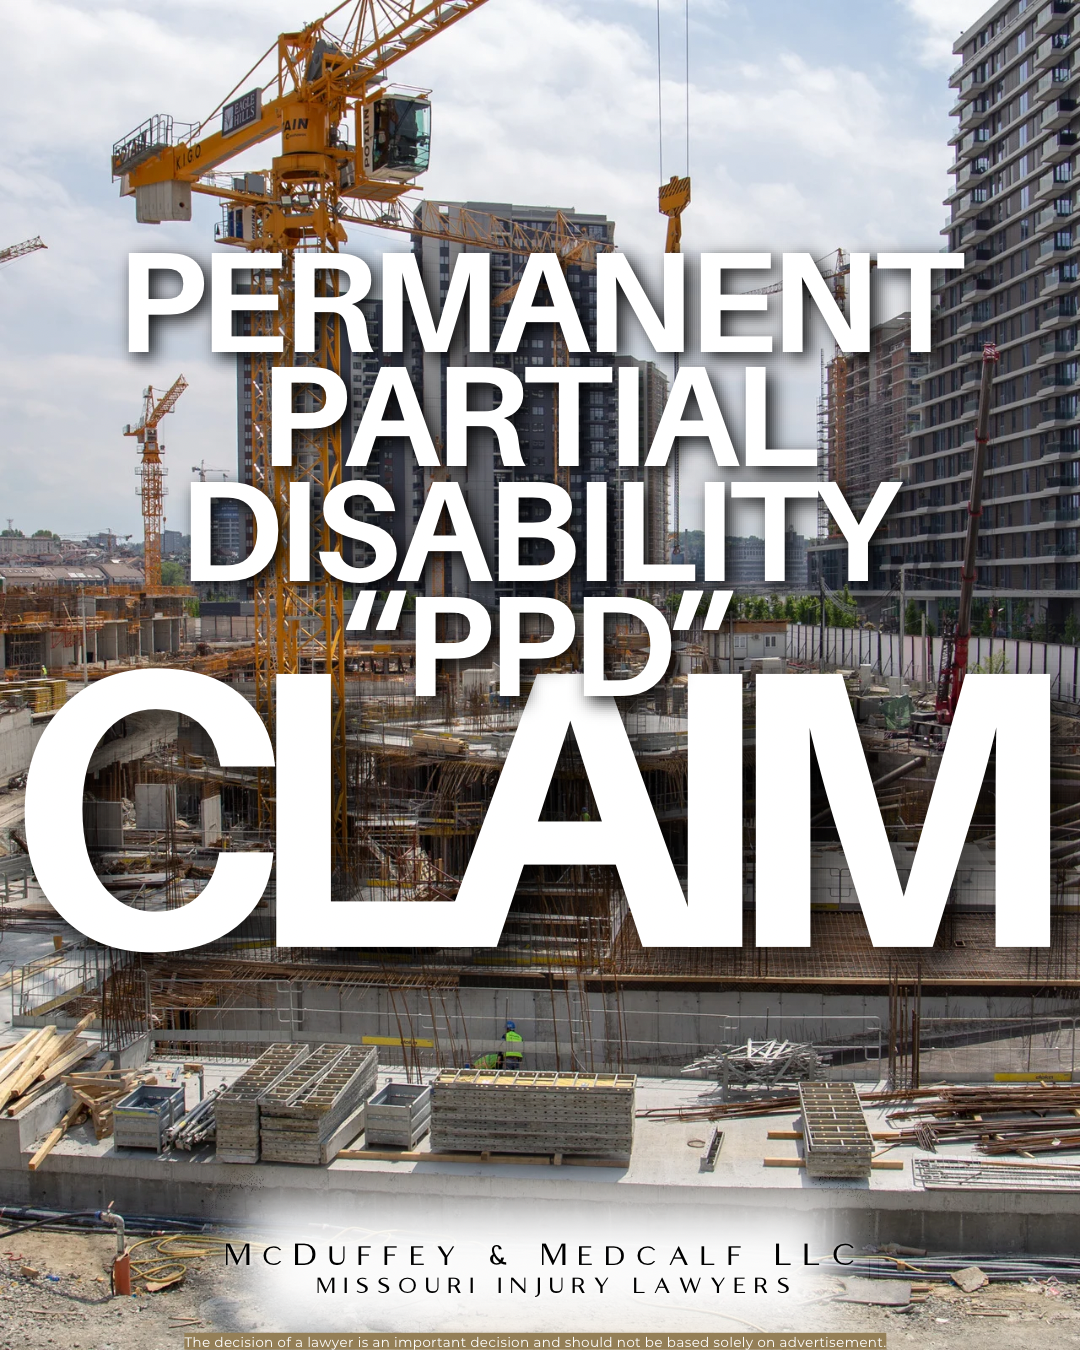 Permanent partial disability PPD claim